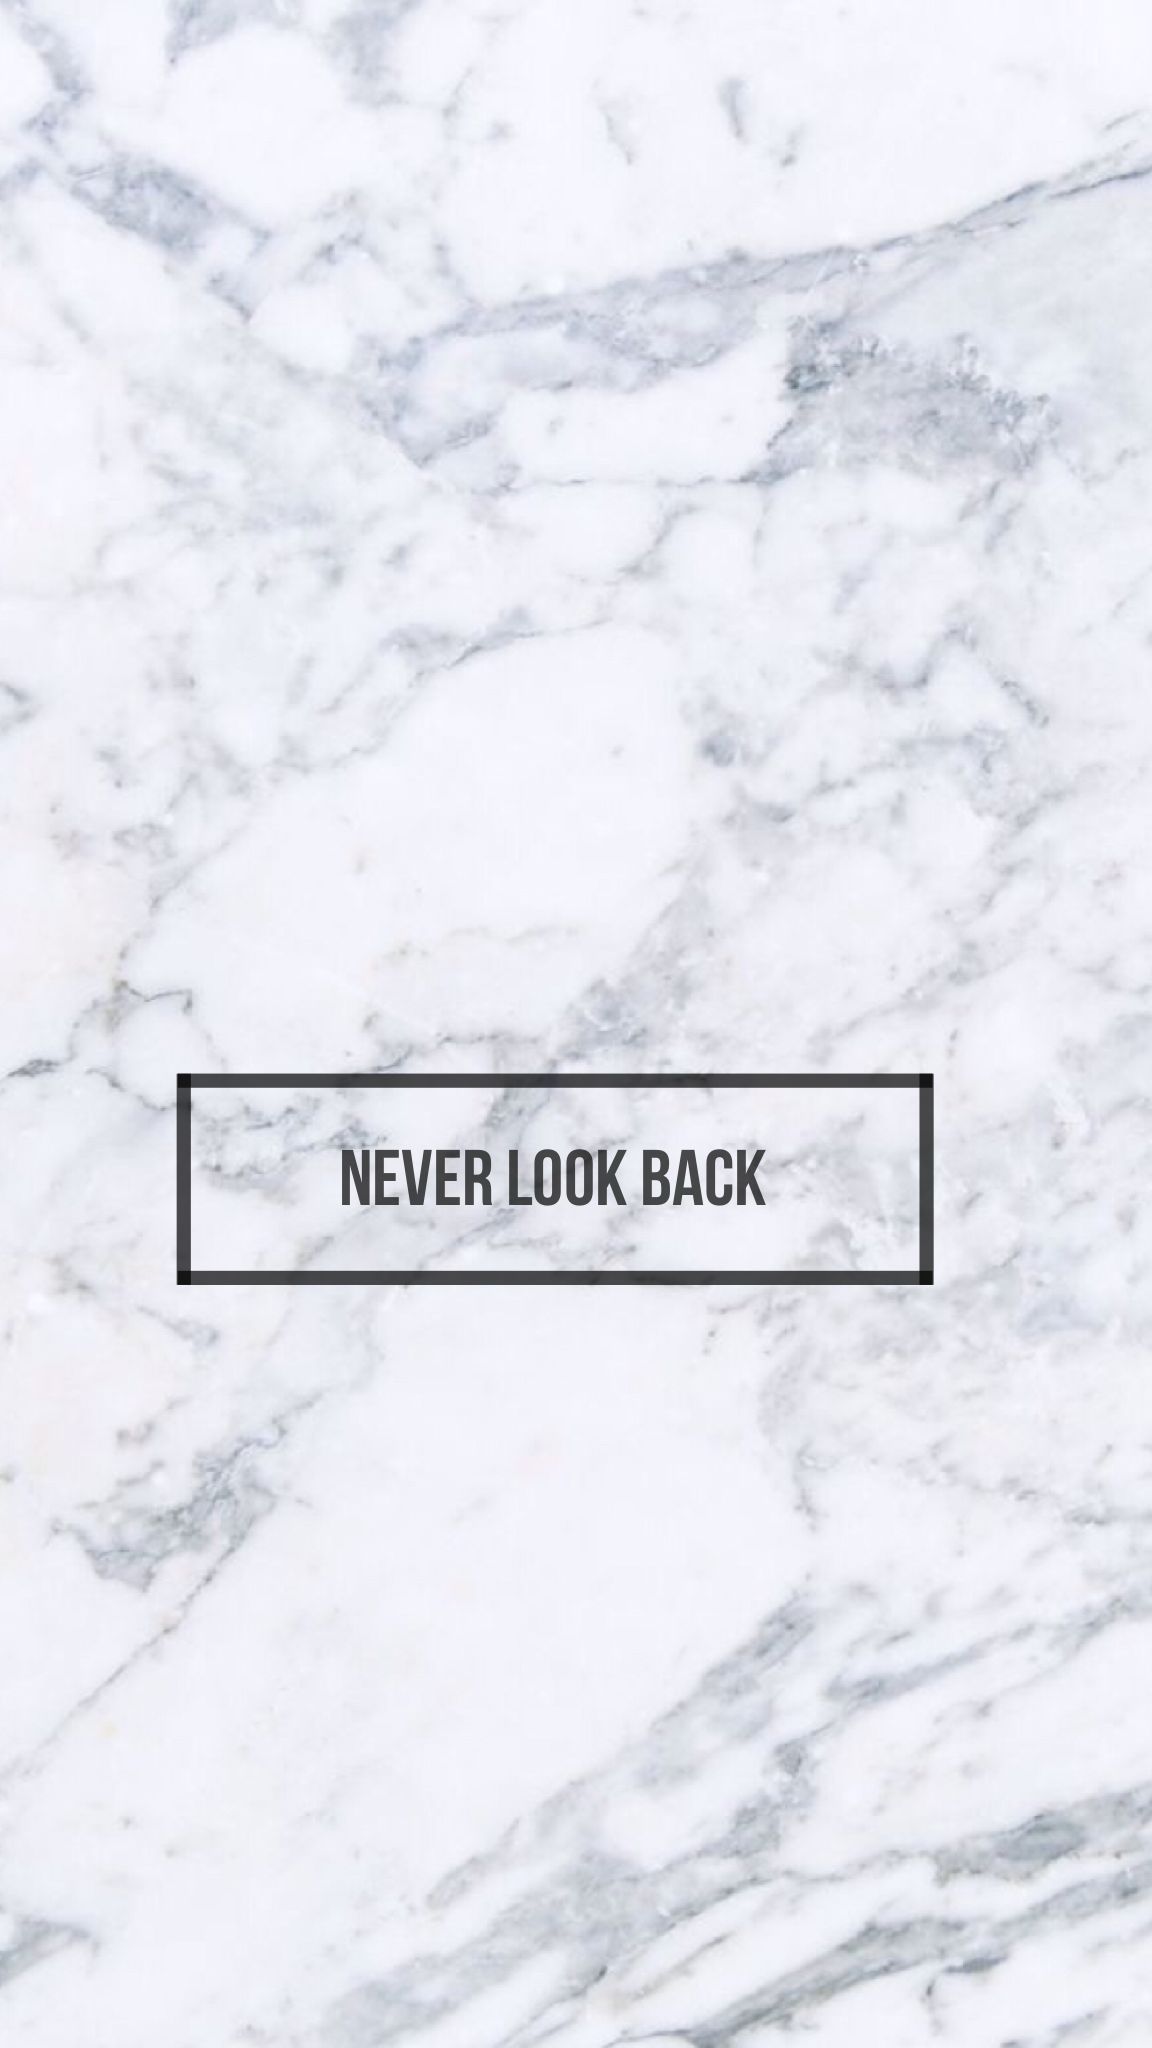 Never look back wallpaper for your phone or desktop. - Modern, cute white